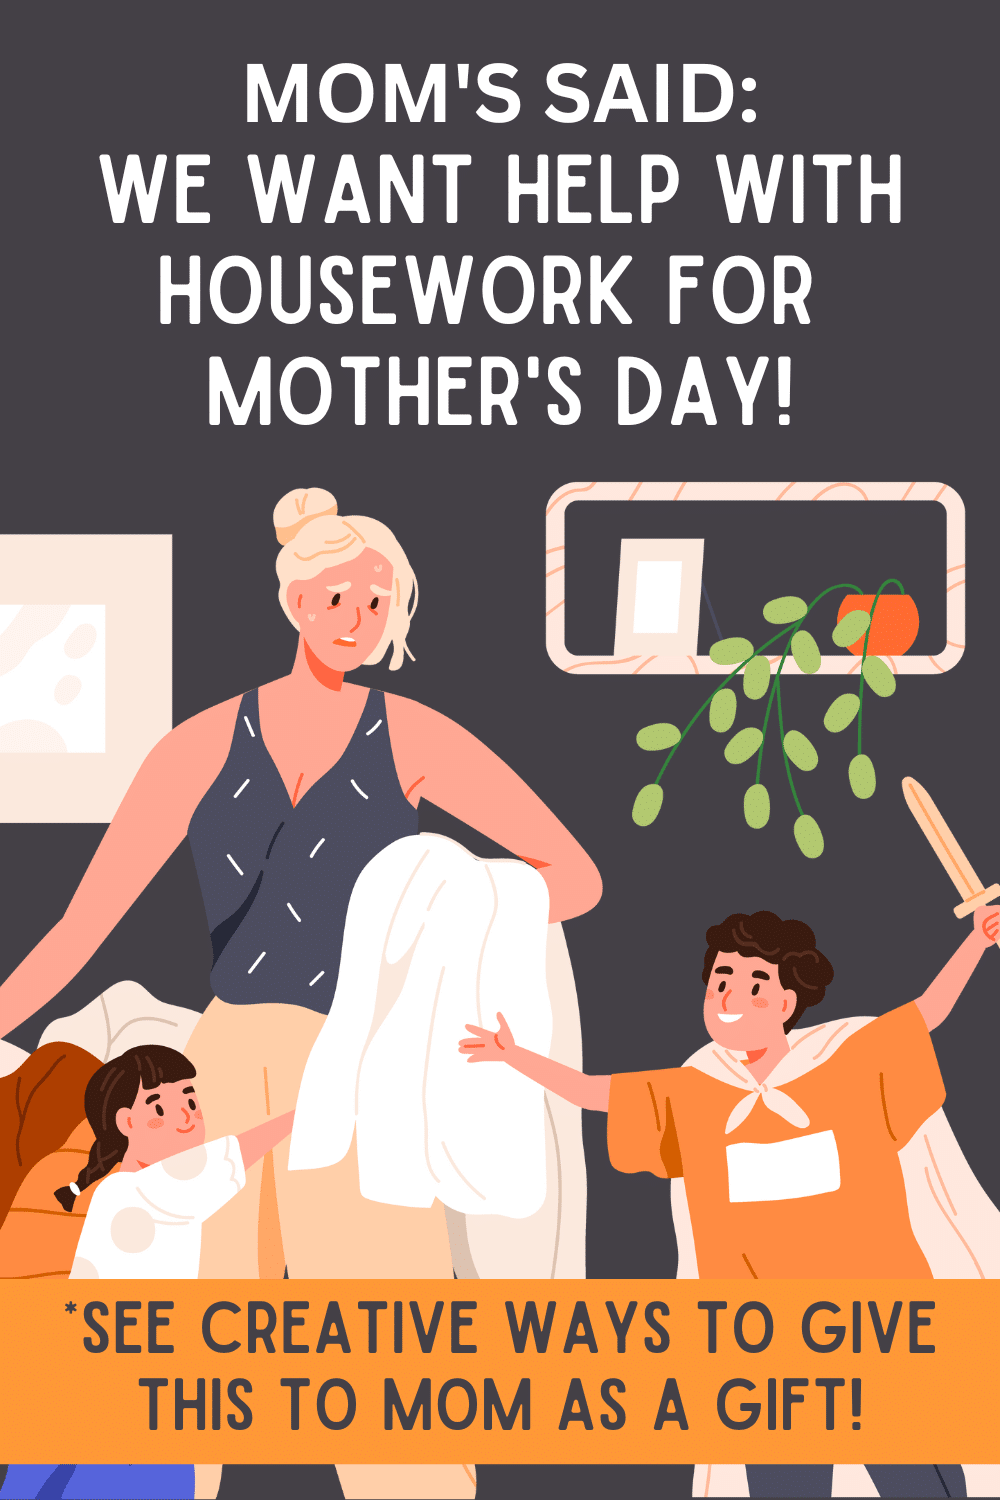 Simple Things Homeschool Moms Really Want for Mother's Day This Year text over vector image of mom doing housework around kids playing